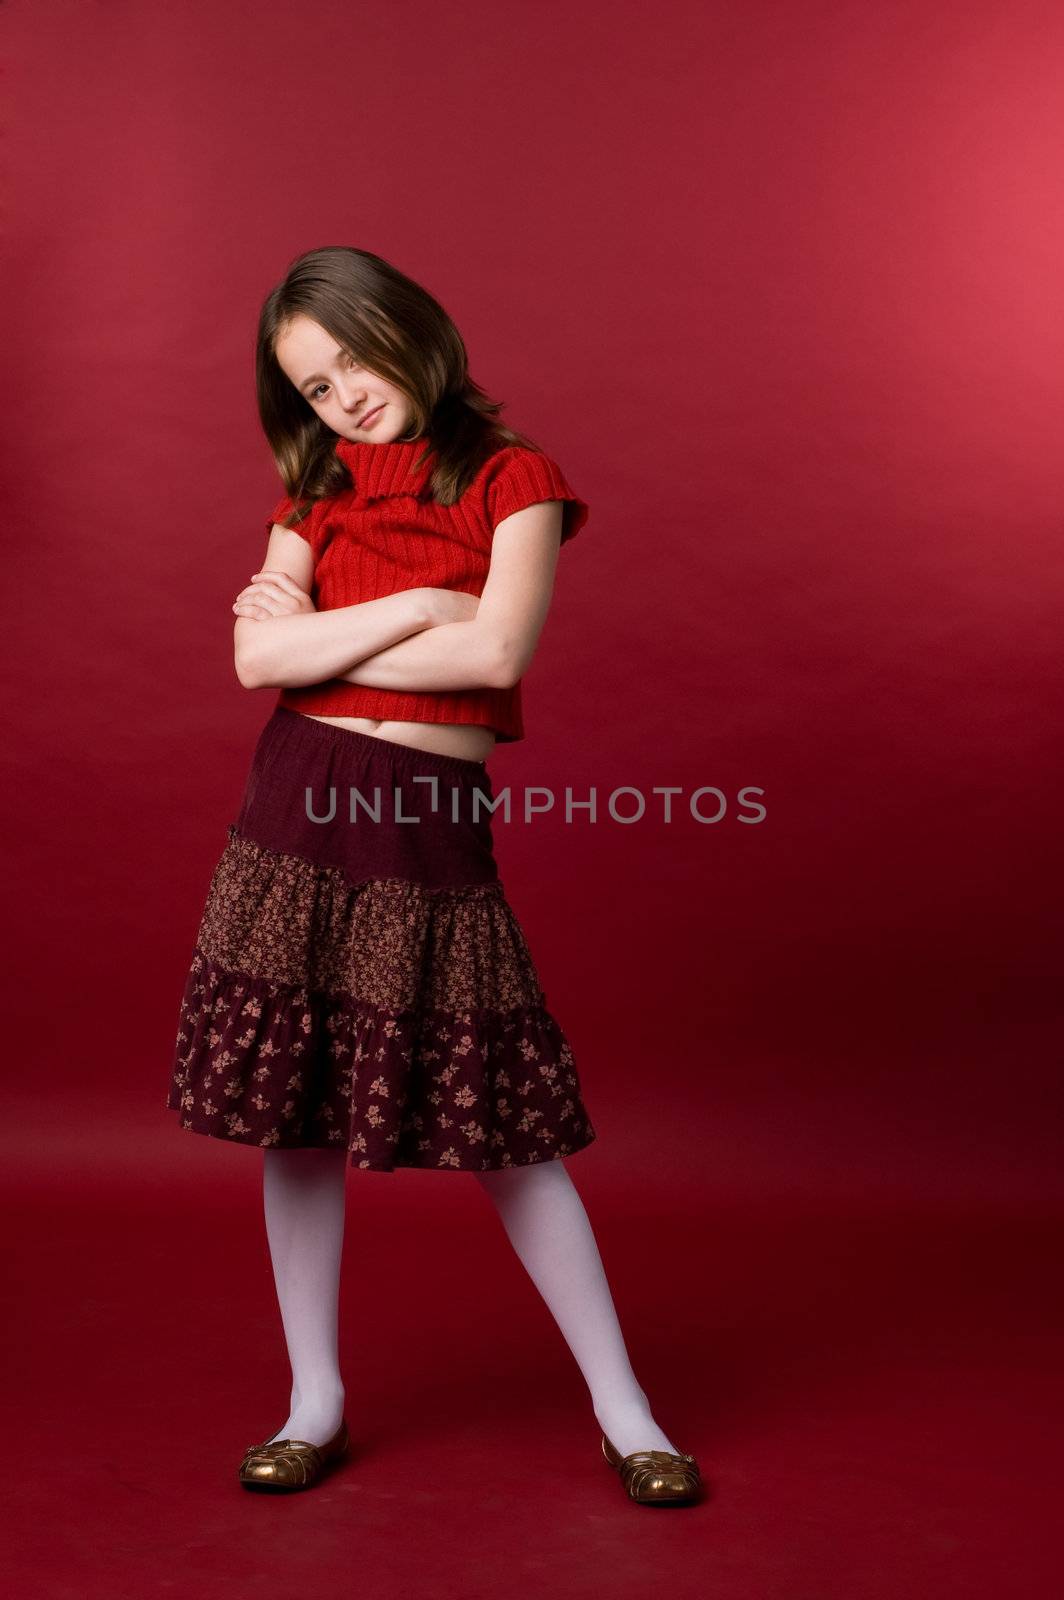 The girl of ten years in a red sweater in studio